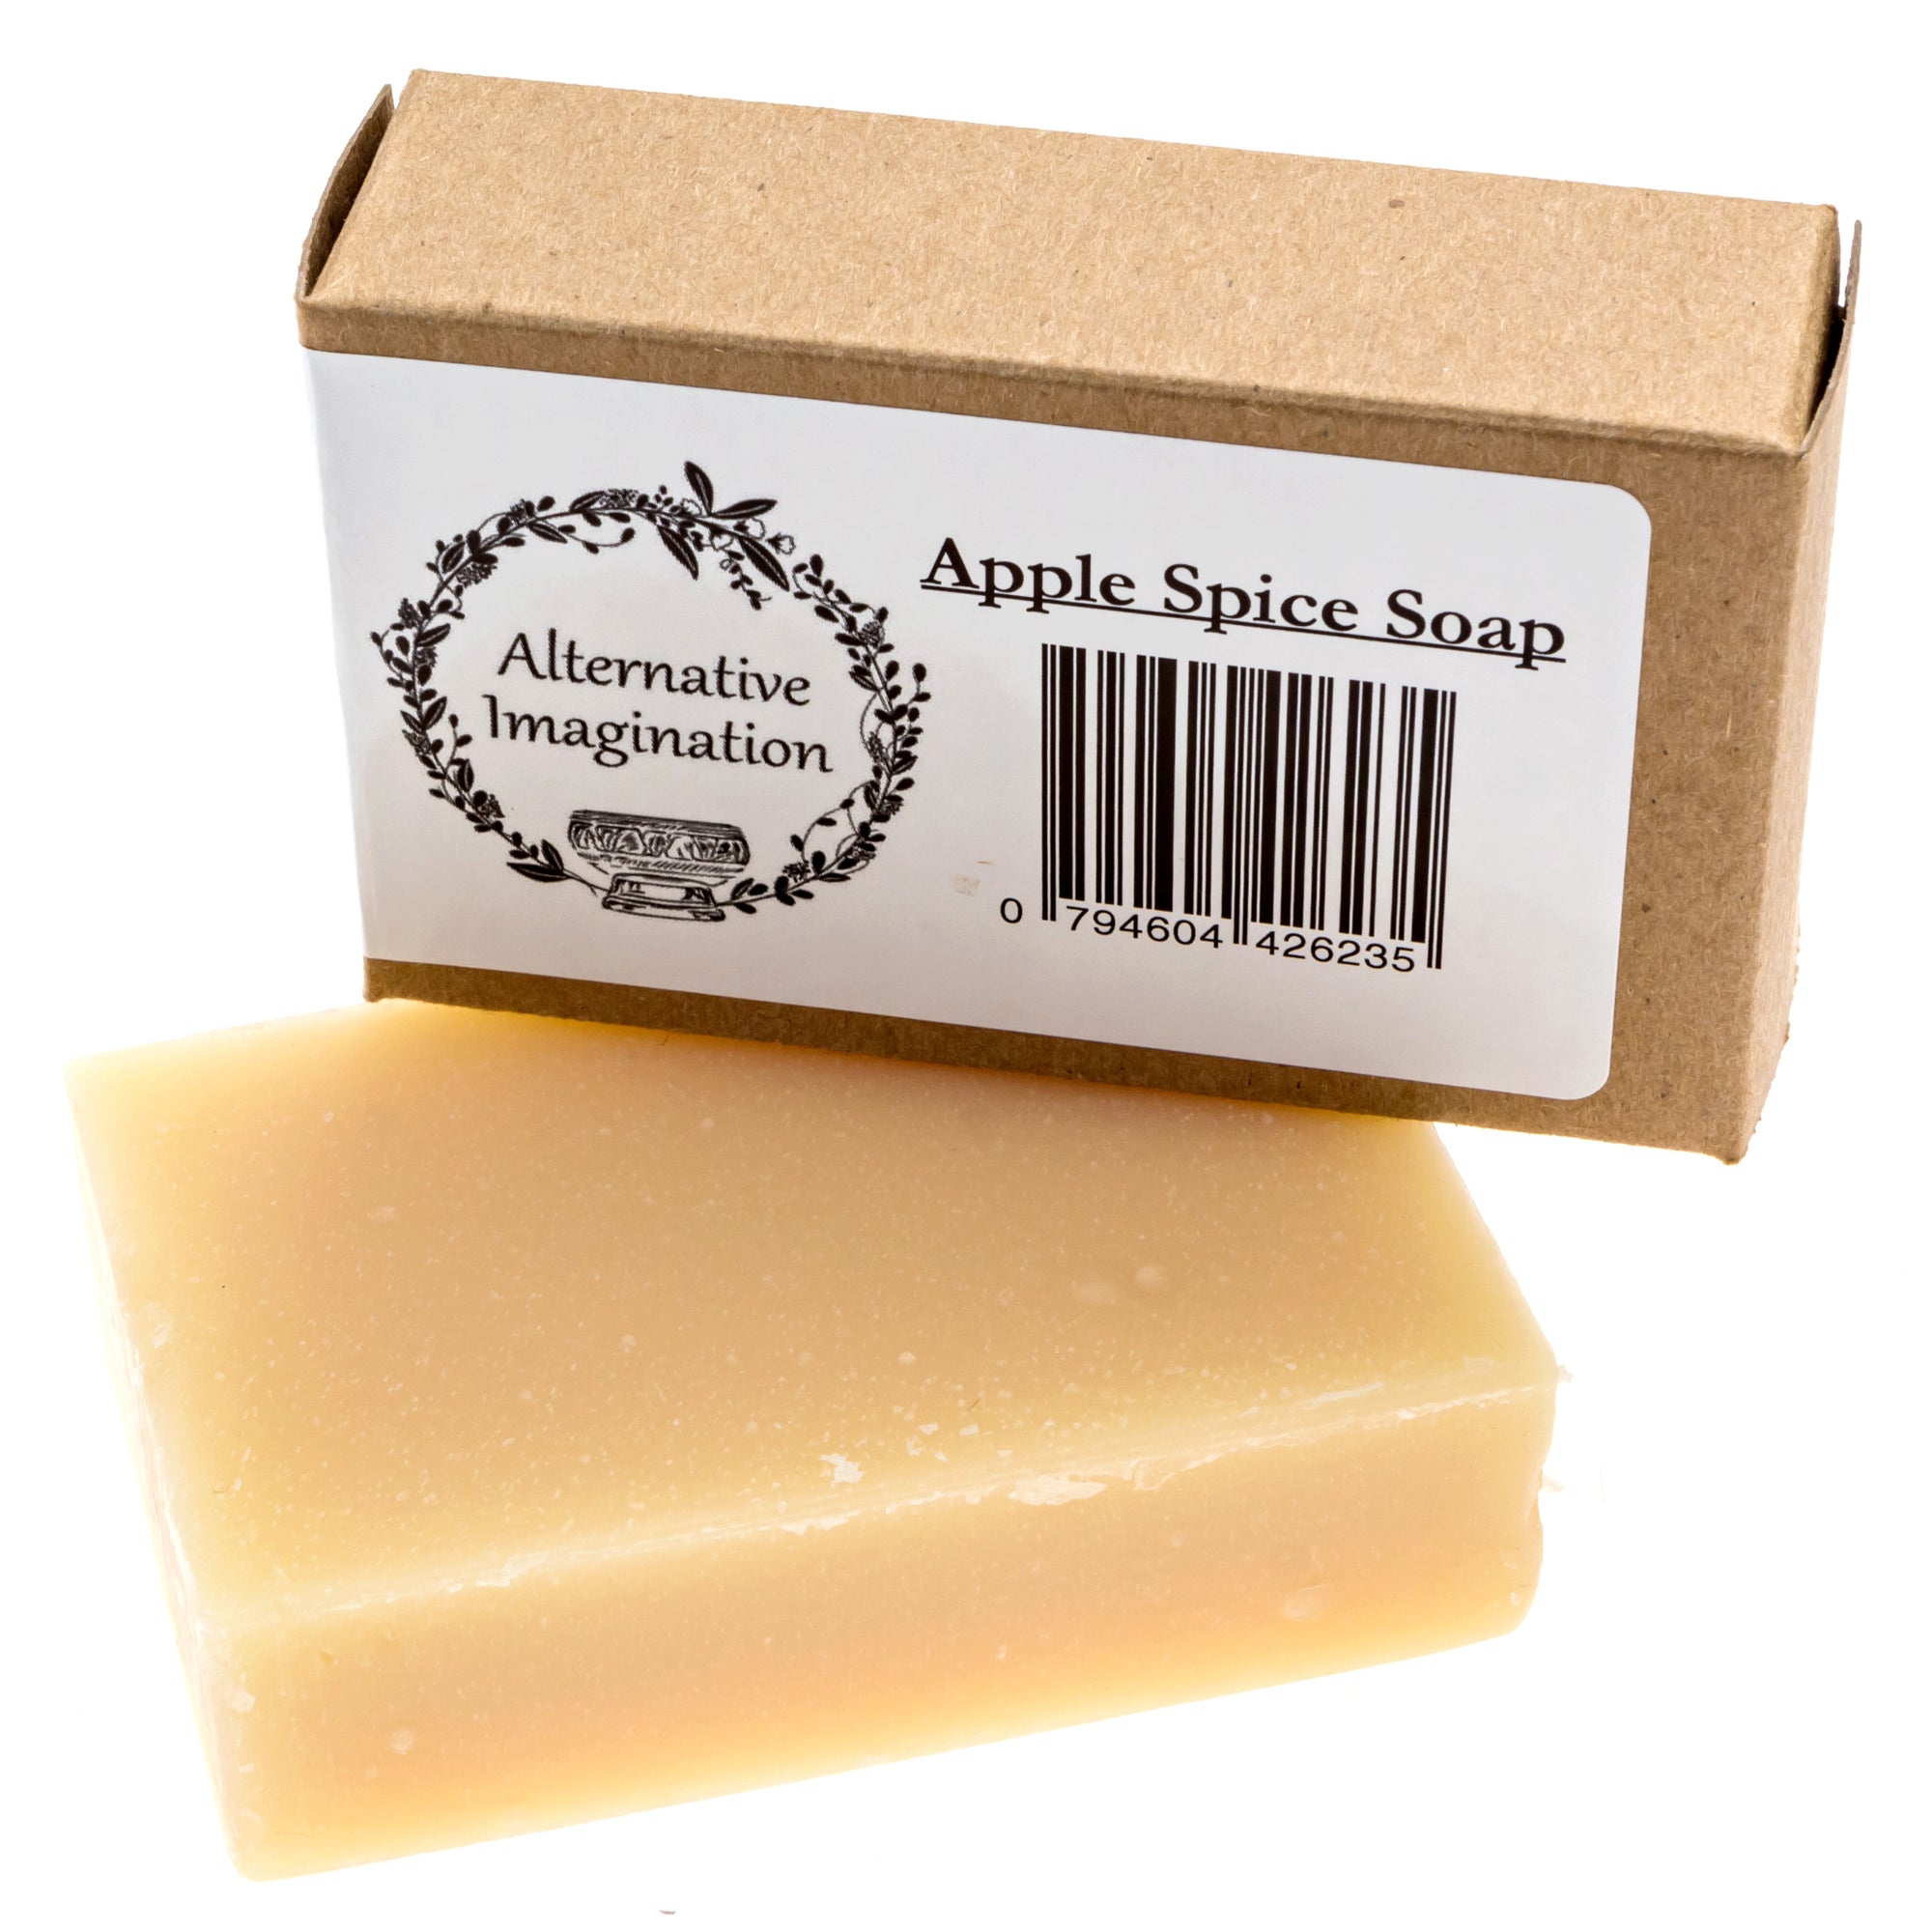 Cold-pressed Soap Bar - Soft Bars for Everyday Use